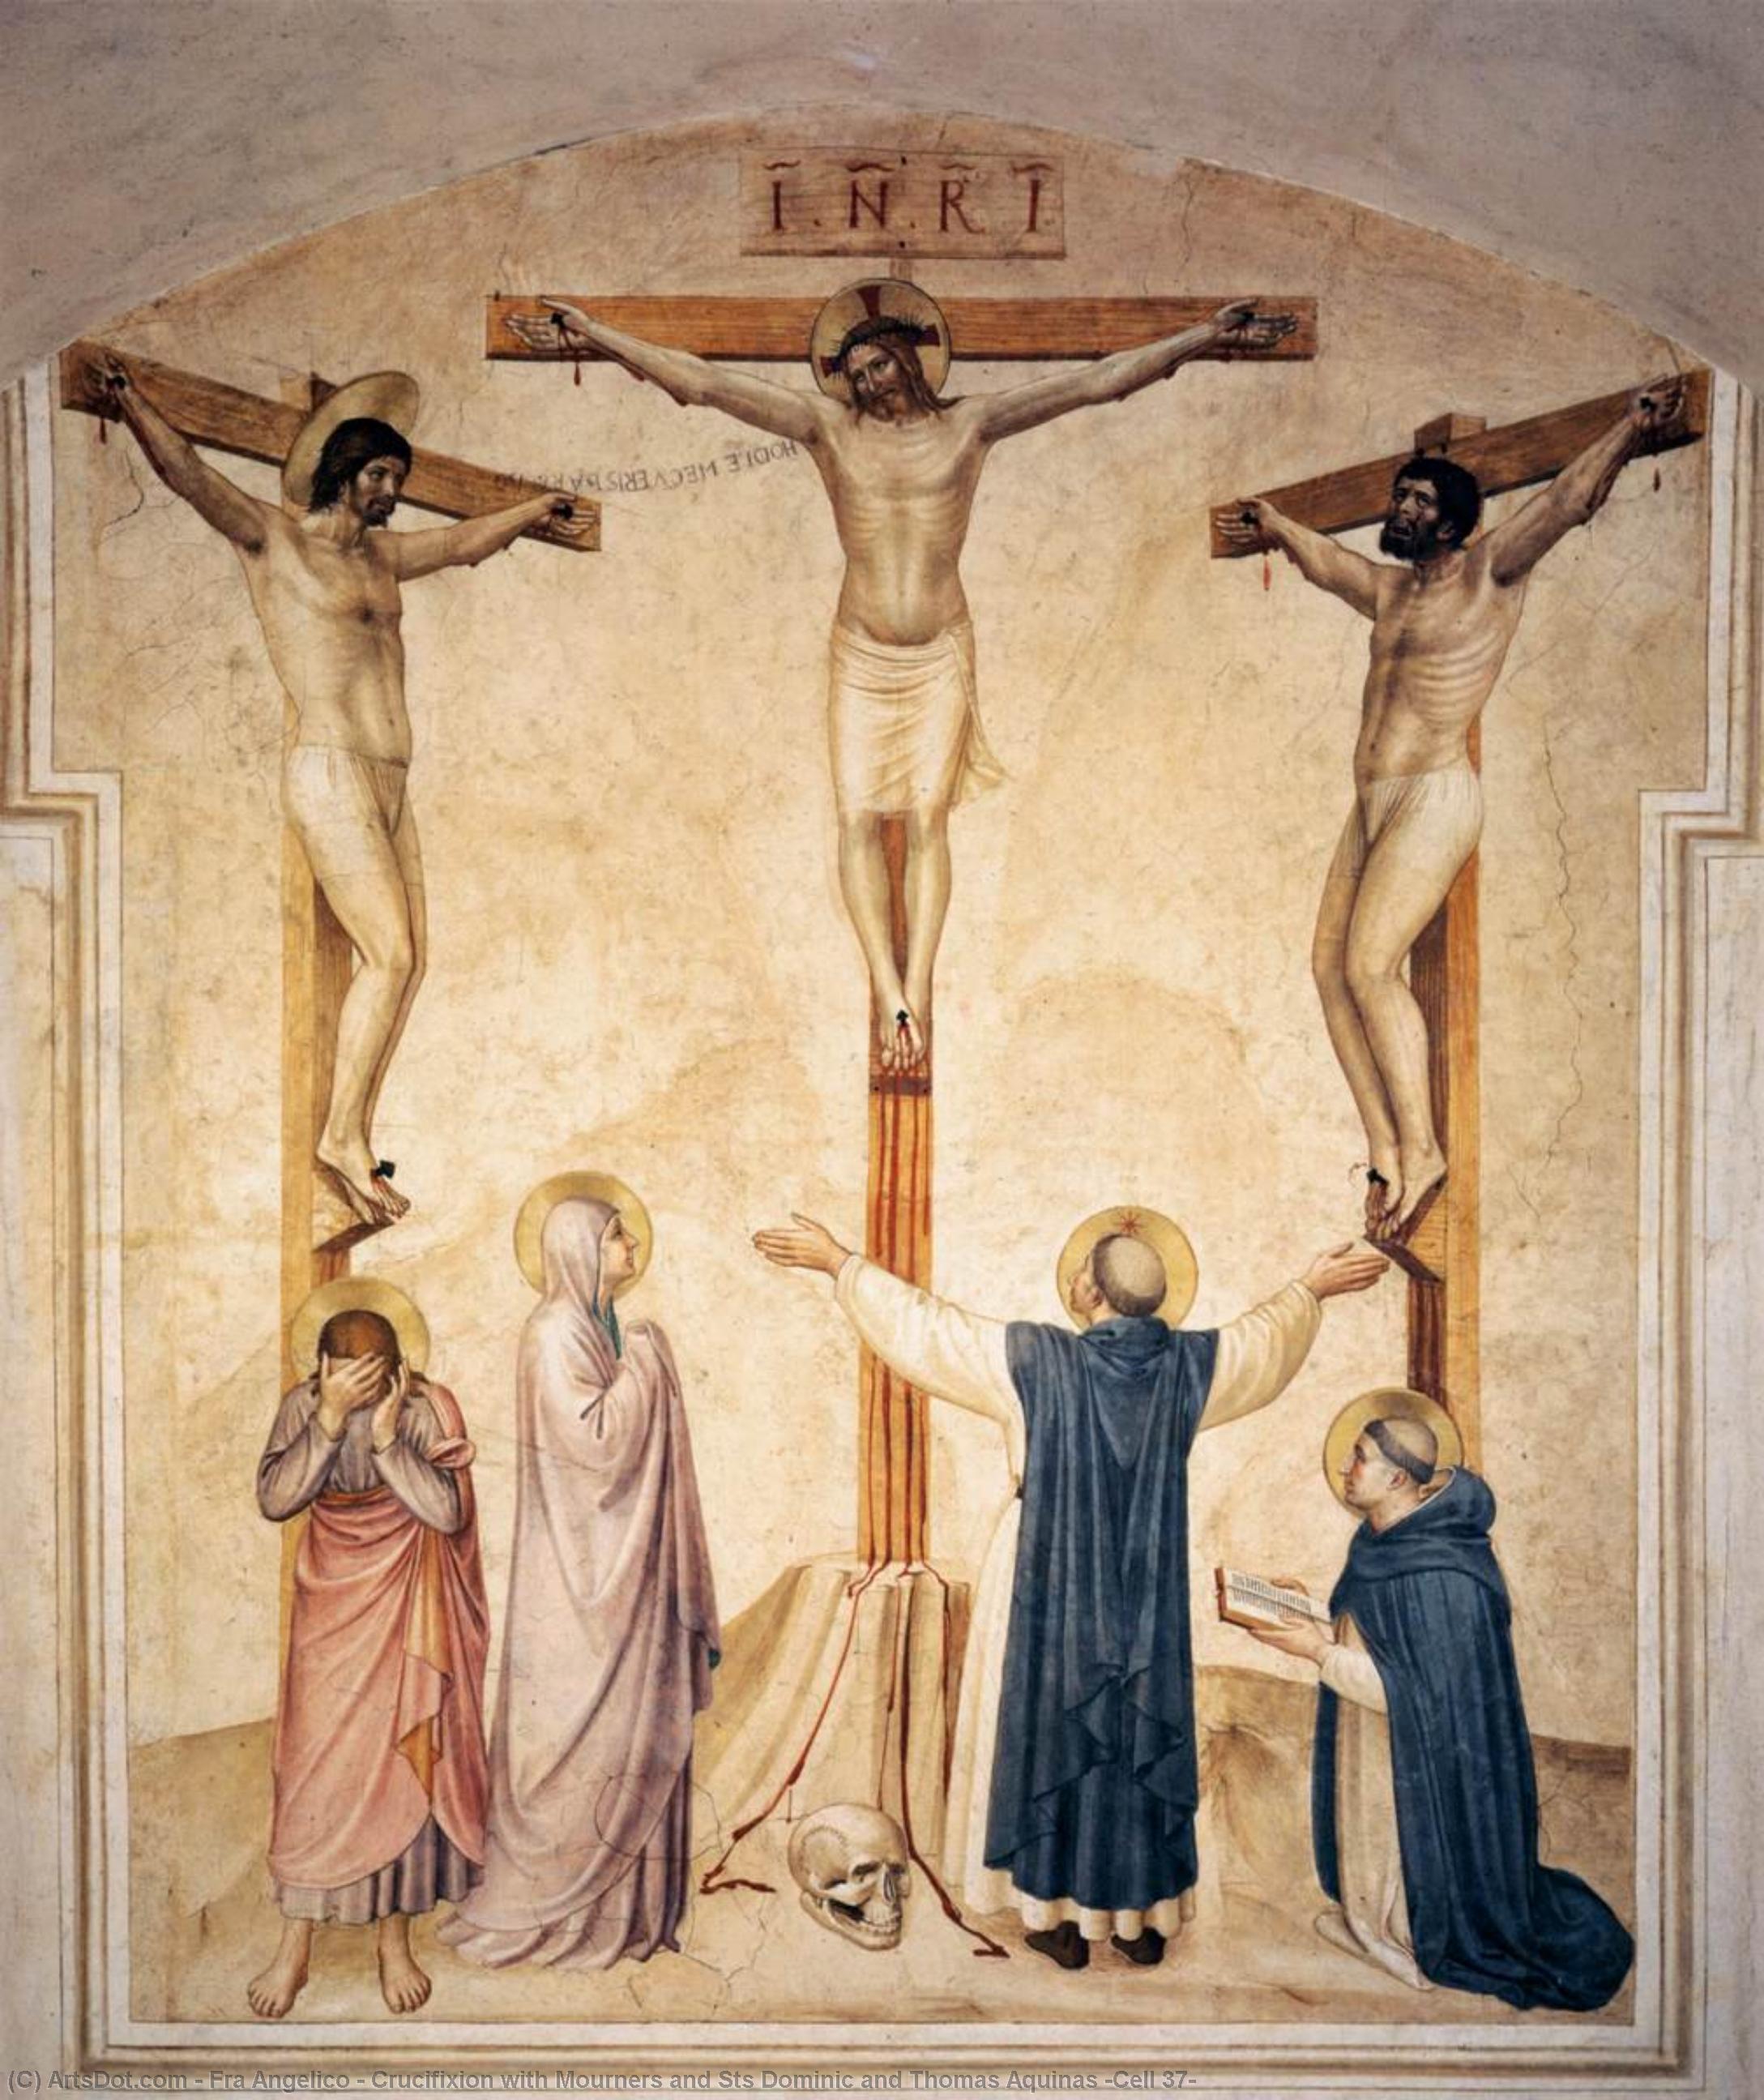 WikiOO.org - Enciclopedia of Fine Arts - Pictura, lucrări de artă Fra Angelico - Crucifixion with Mourners and Sts Dominic and Thomas Aquinas (Cell 37)